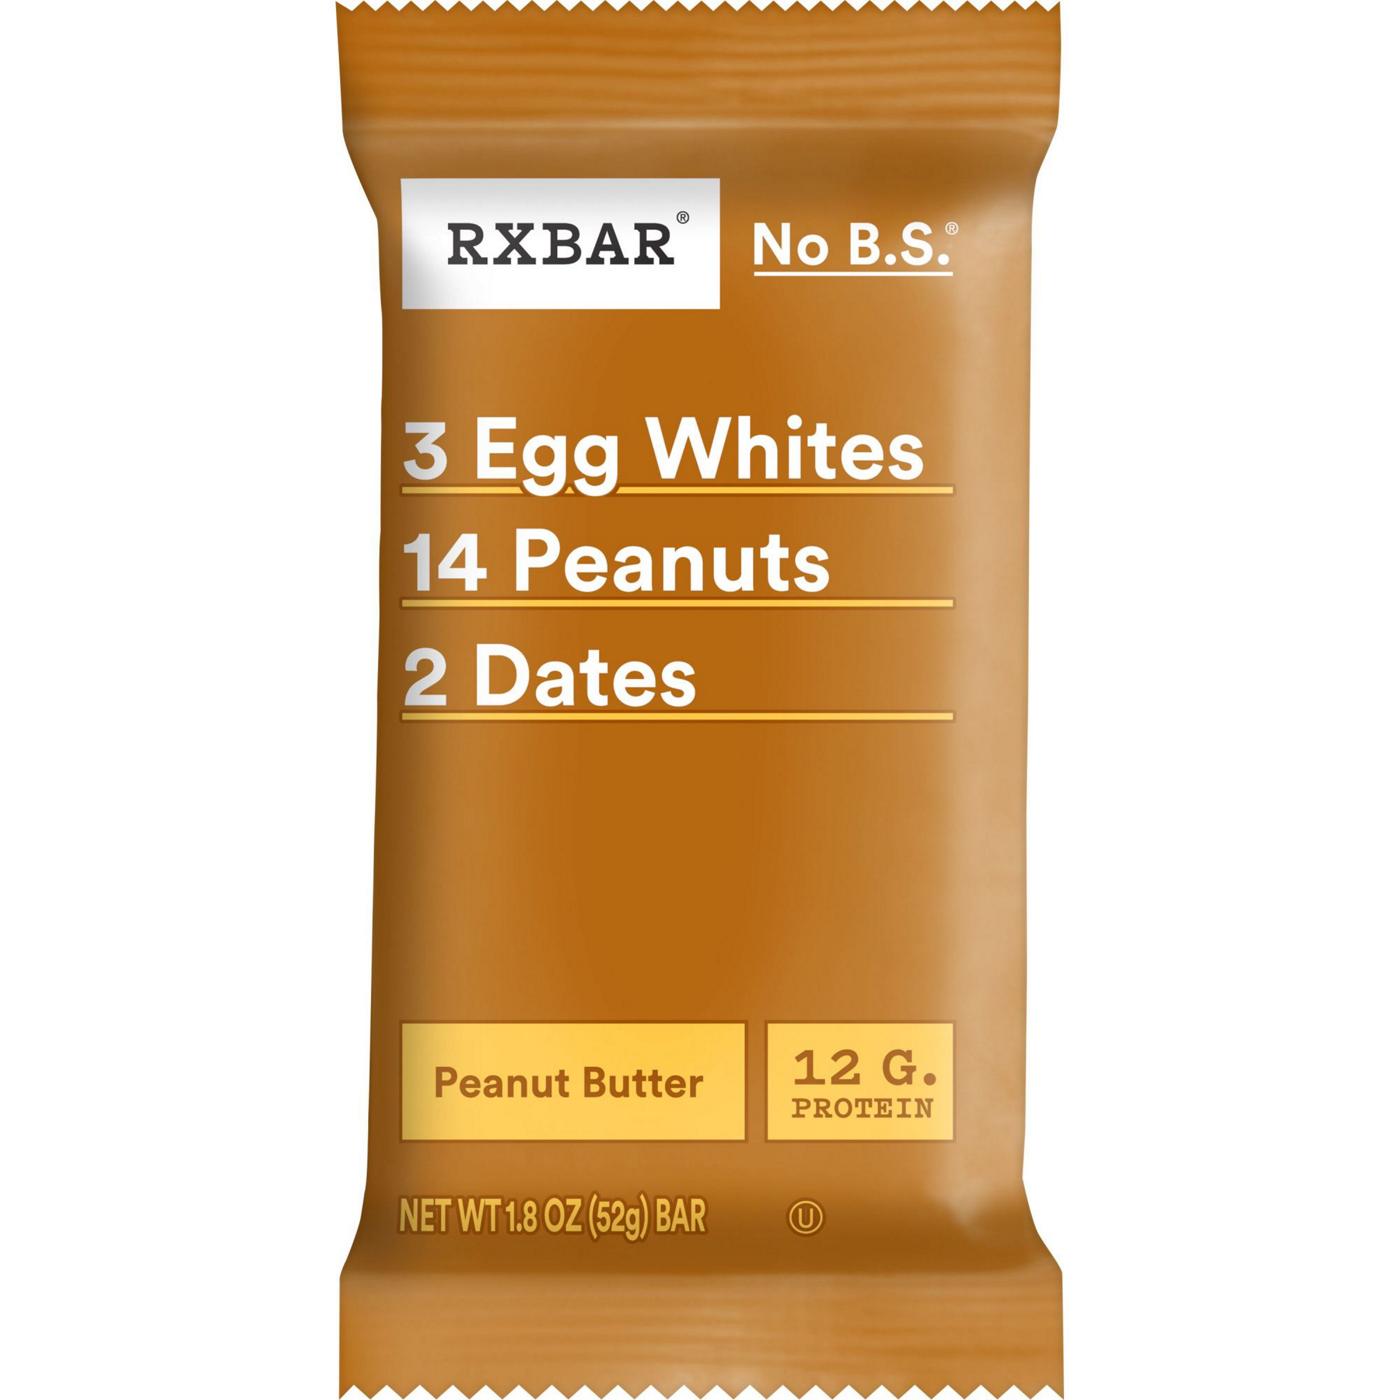 RXBAR Peanut Butter Protein Bars; image 1 of 3